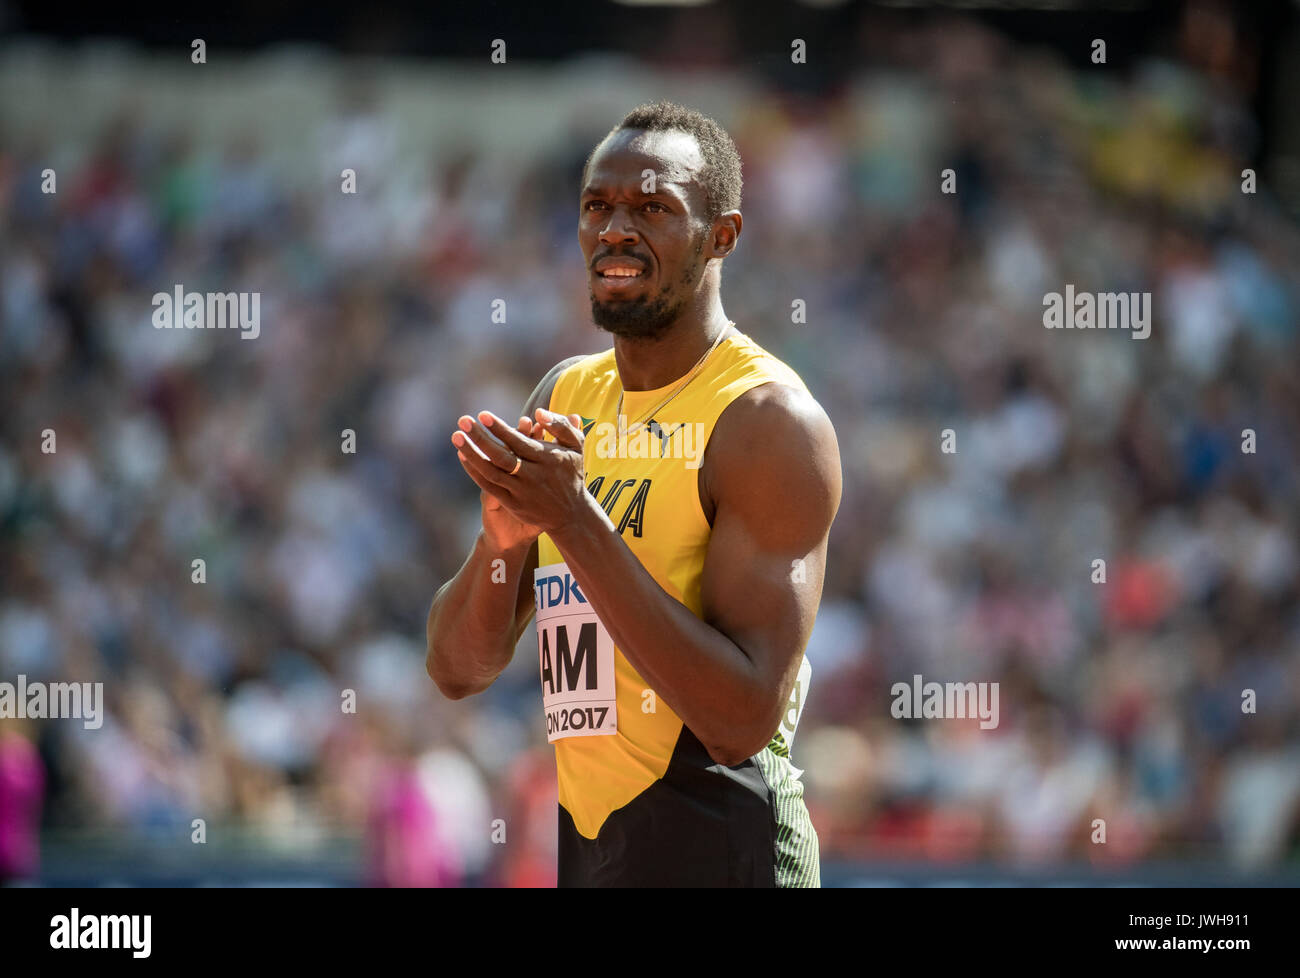 London, UK. 12th Aug, 2017. Usain BOLT of Jamaica before his 4x100 metre heat during the IAAF World Athletics Championships 2017 on DAY 9 at the Olympic Park, London, England on 12 August 2017. Photo by Andy Rowland/PRiME Media Images. Credit: Andrew Rowland/Alamy Live News Stock Photo